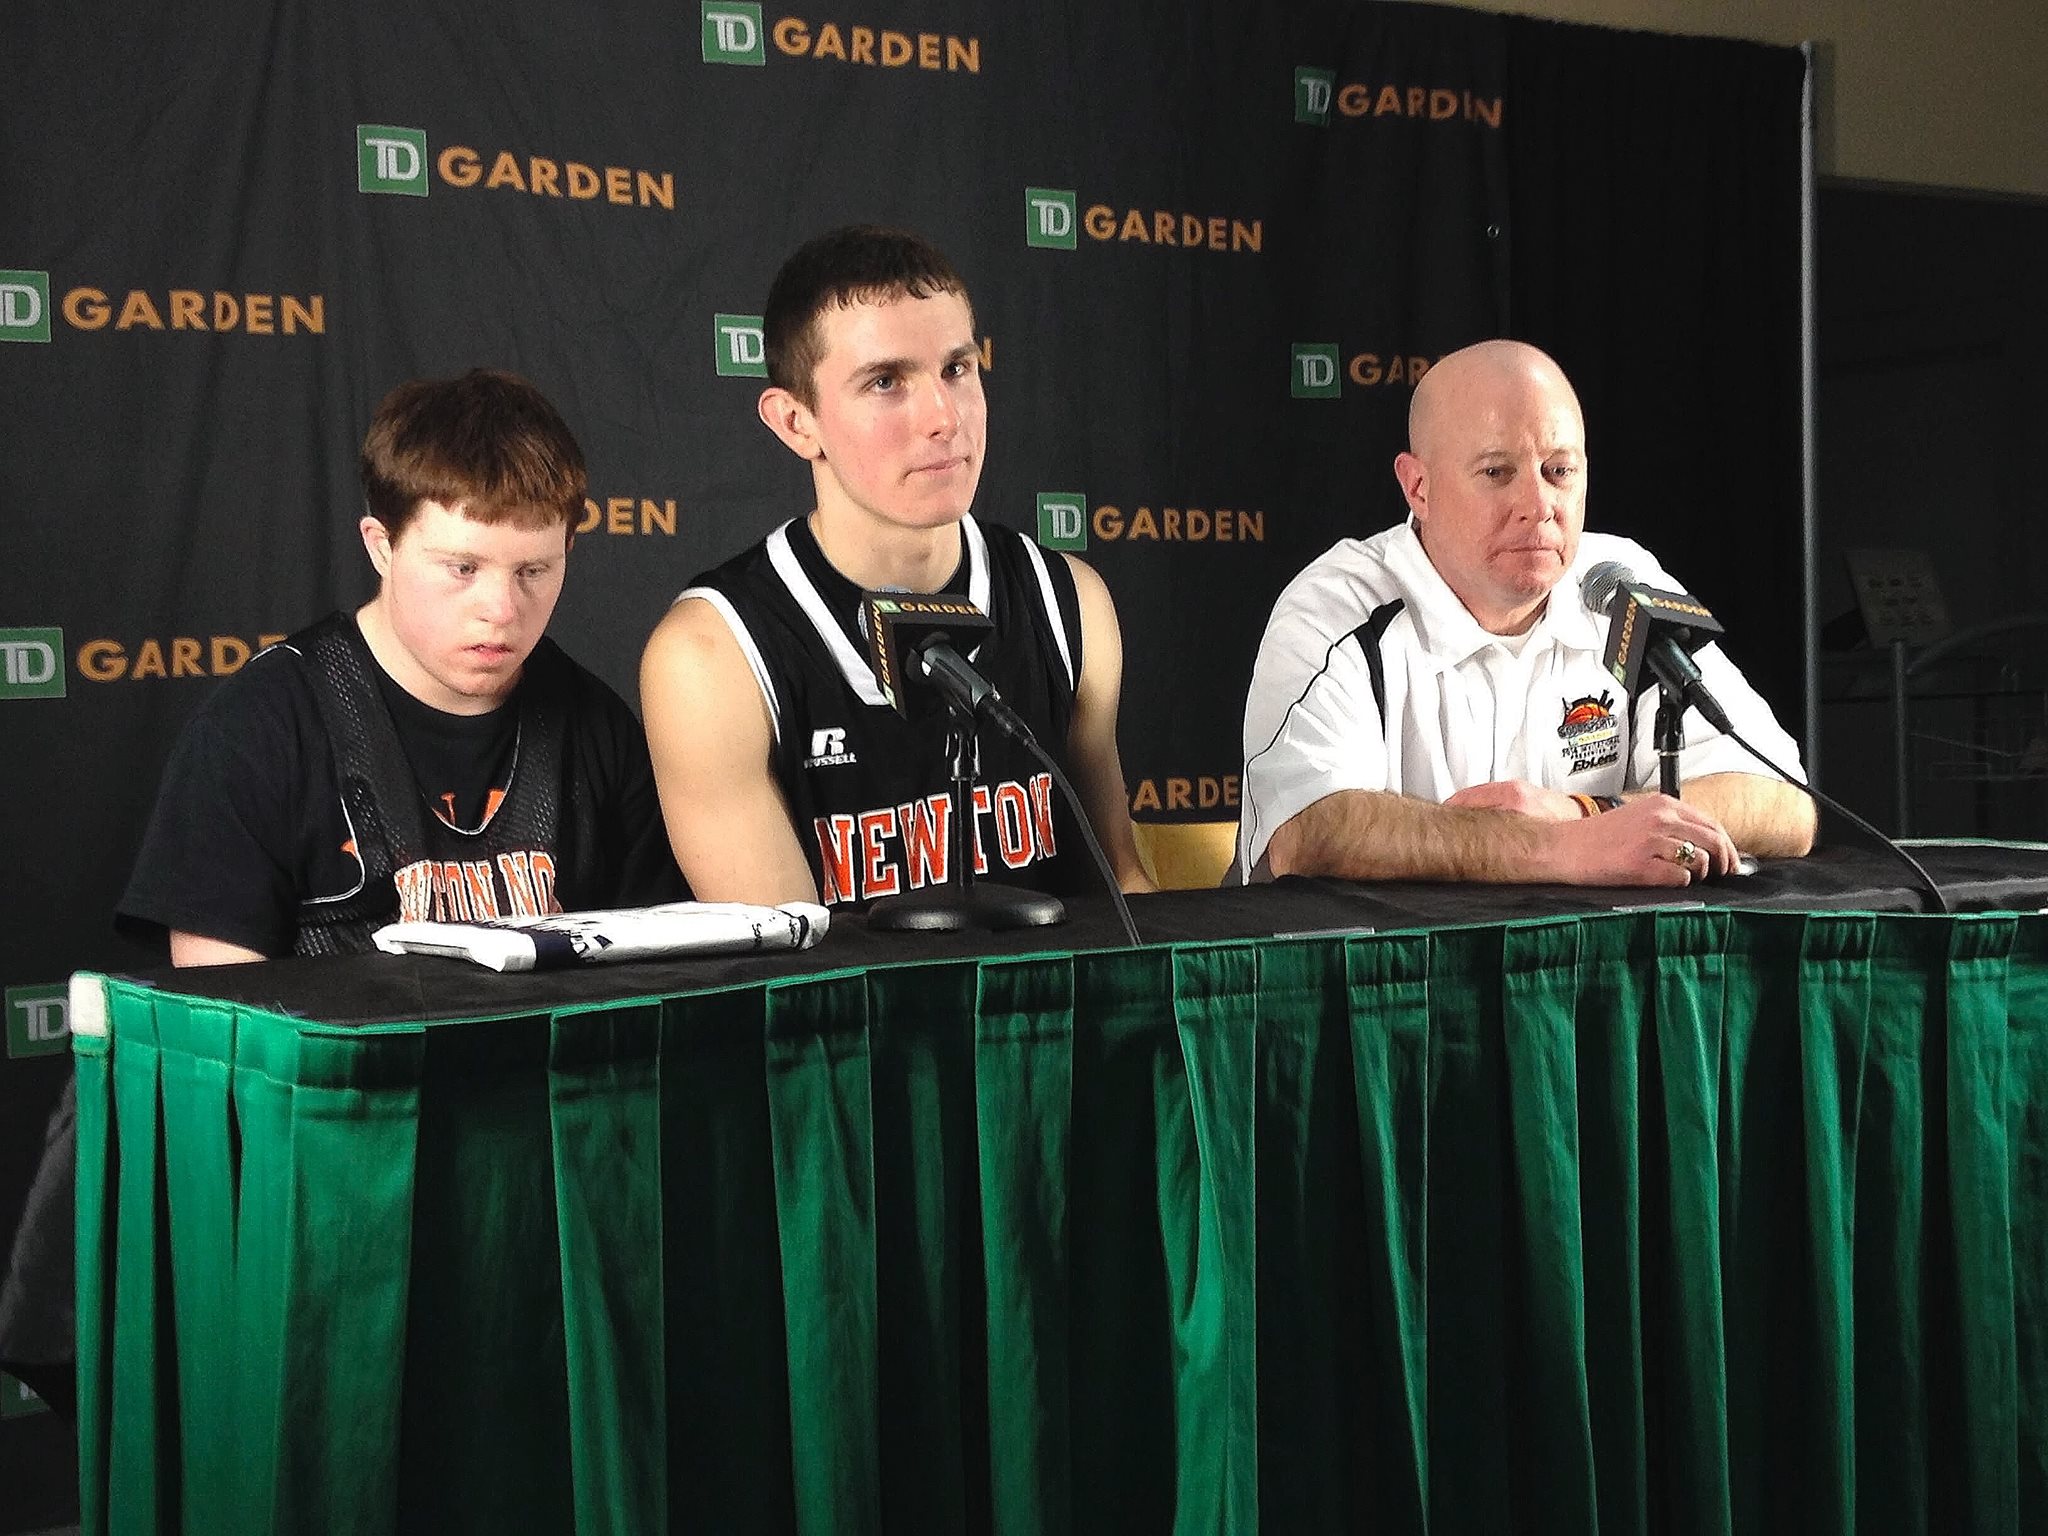 Team manager Brendan Durkin, junior captain Tommy Mobley, and basketball coach Paul Connolly fielding questions at last Saturday's Good Sports Invitational press conference. Photo by Jacob Gurvis.